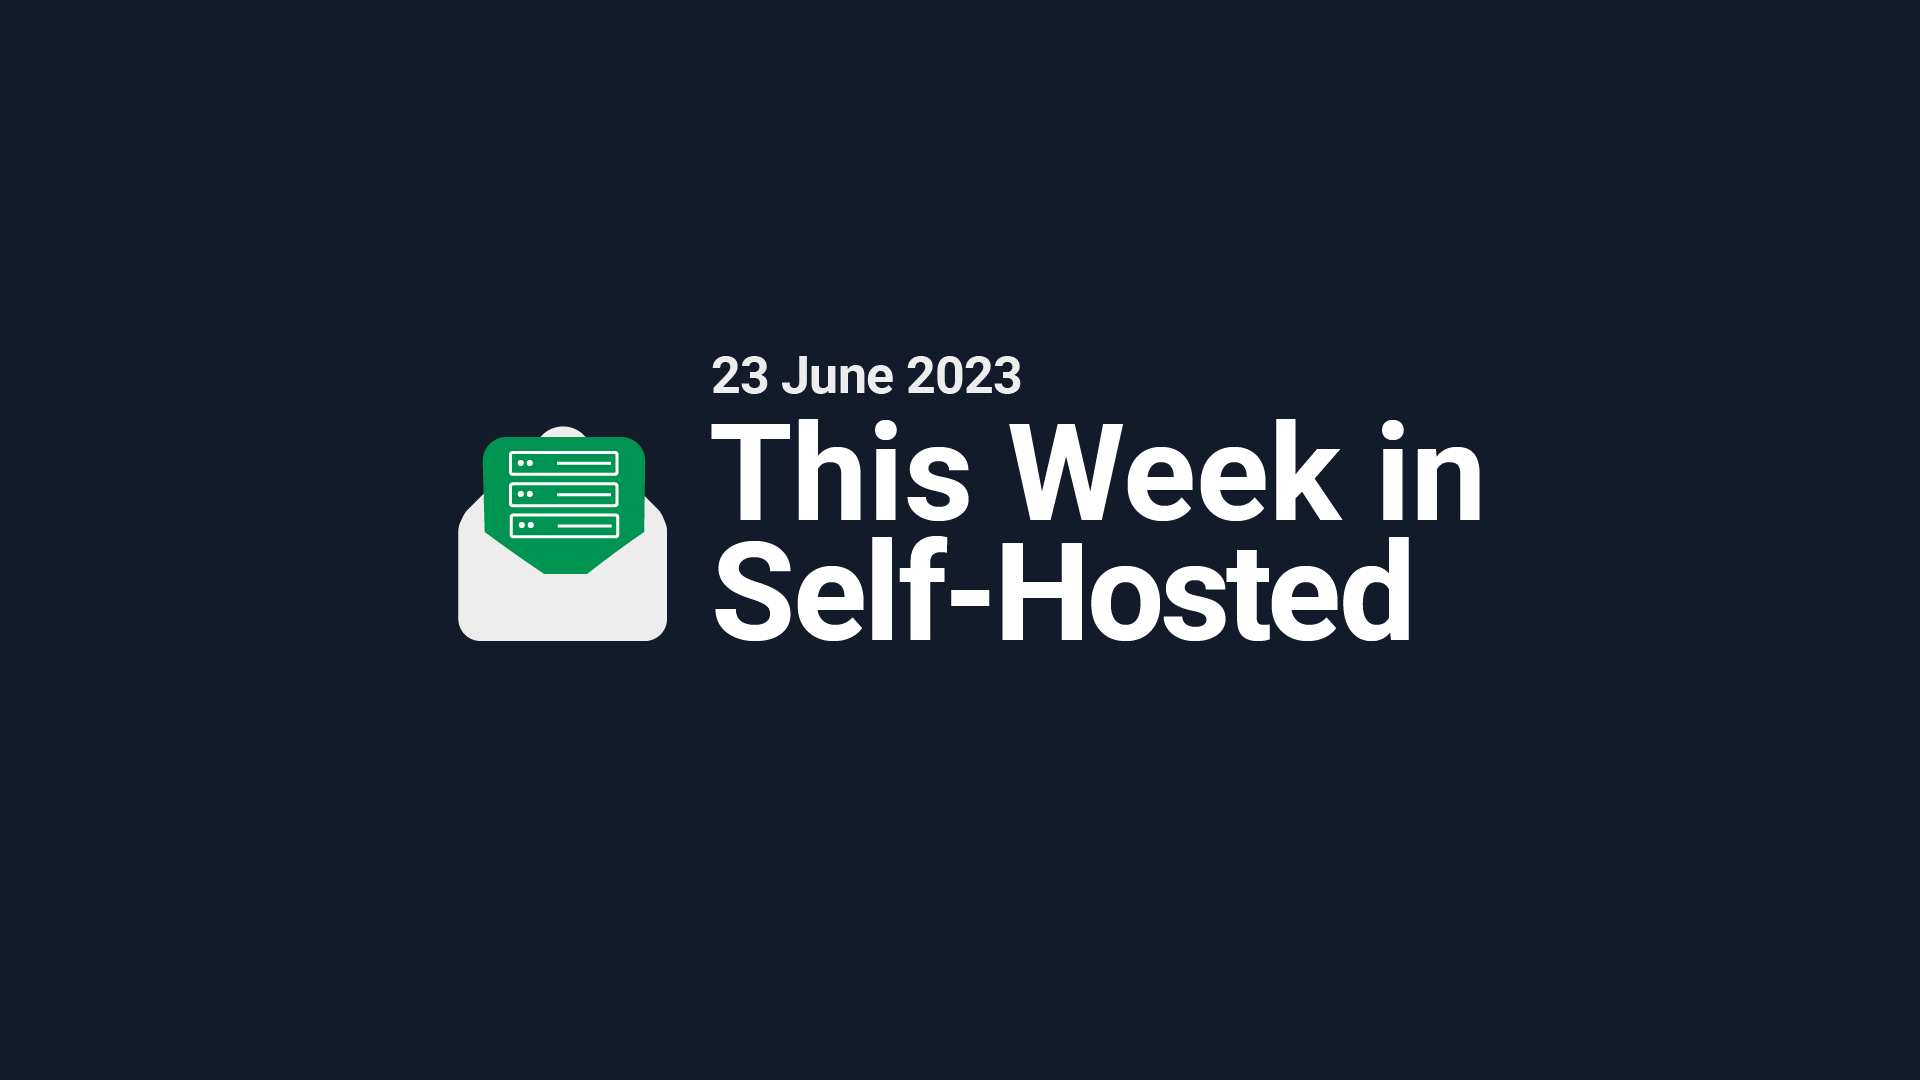 This Week in Self-Hosted (23 June 2023) Post image